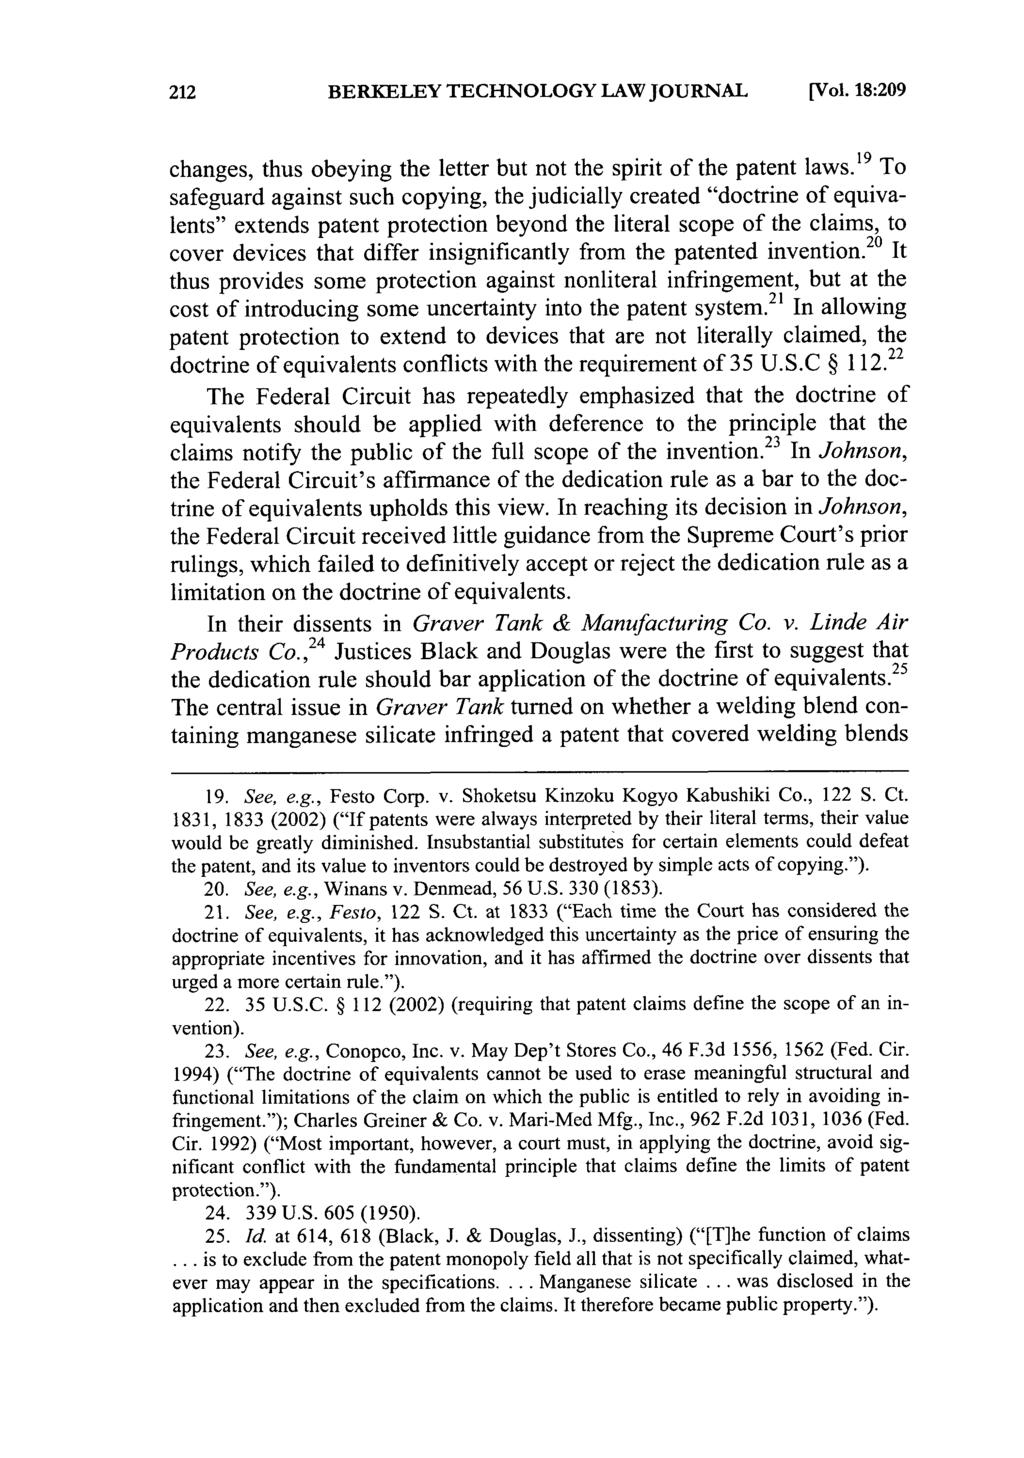 BERKELEY TECHNOLOGY LAW JOURNAL [Vol. 18:209 changes, thus obeying the letter but not the spirit of the patent laws.